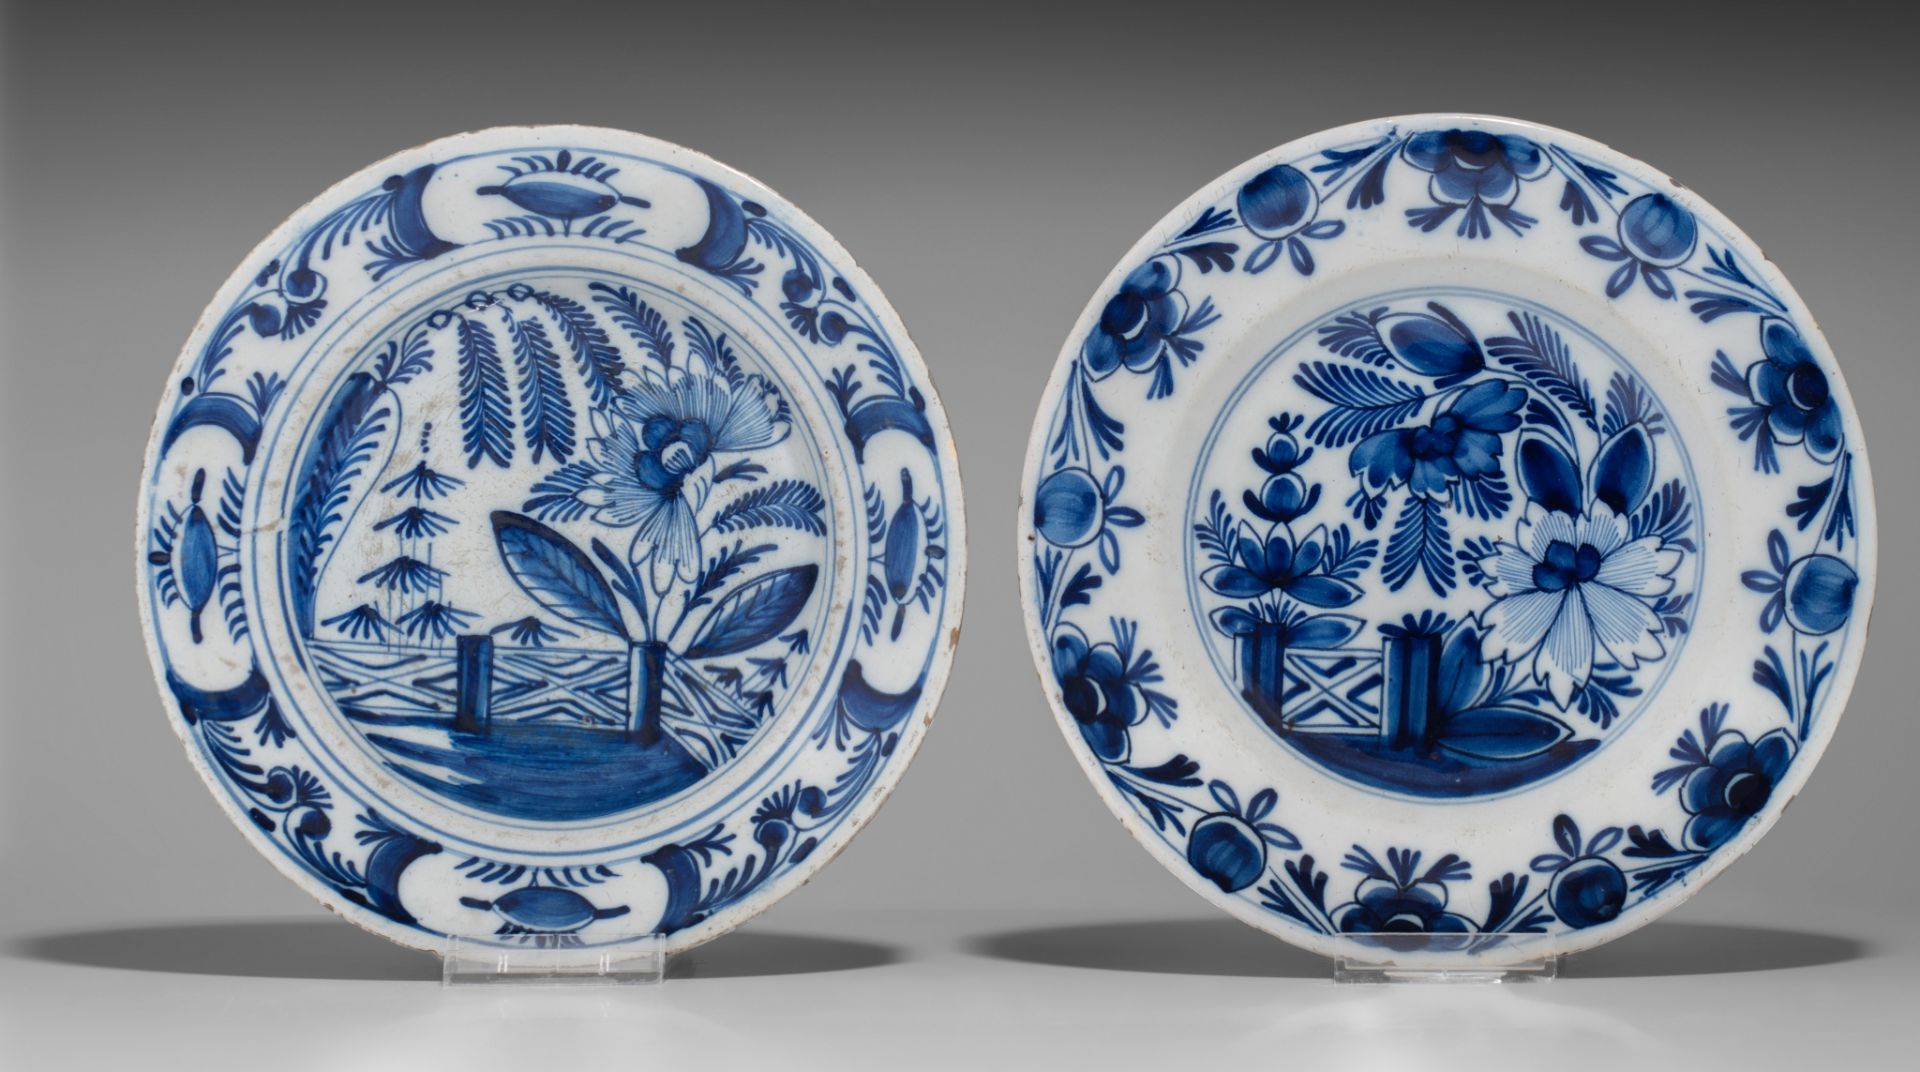 A pair of 18thC Delft plates by Geertruy Verstelle, added 12 blue and white plates, ø 16 - 34 cm - Image 6 of 17